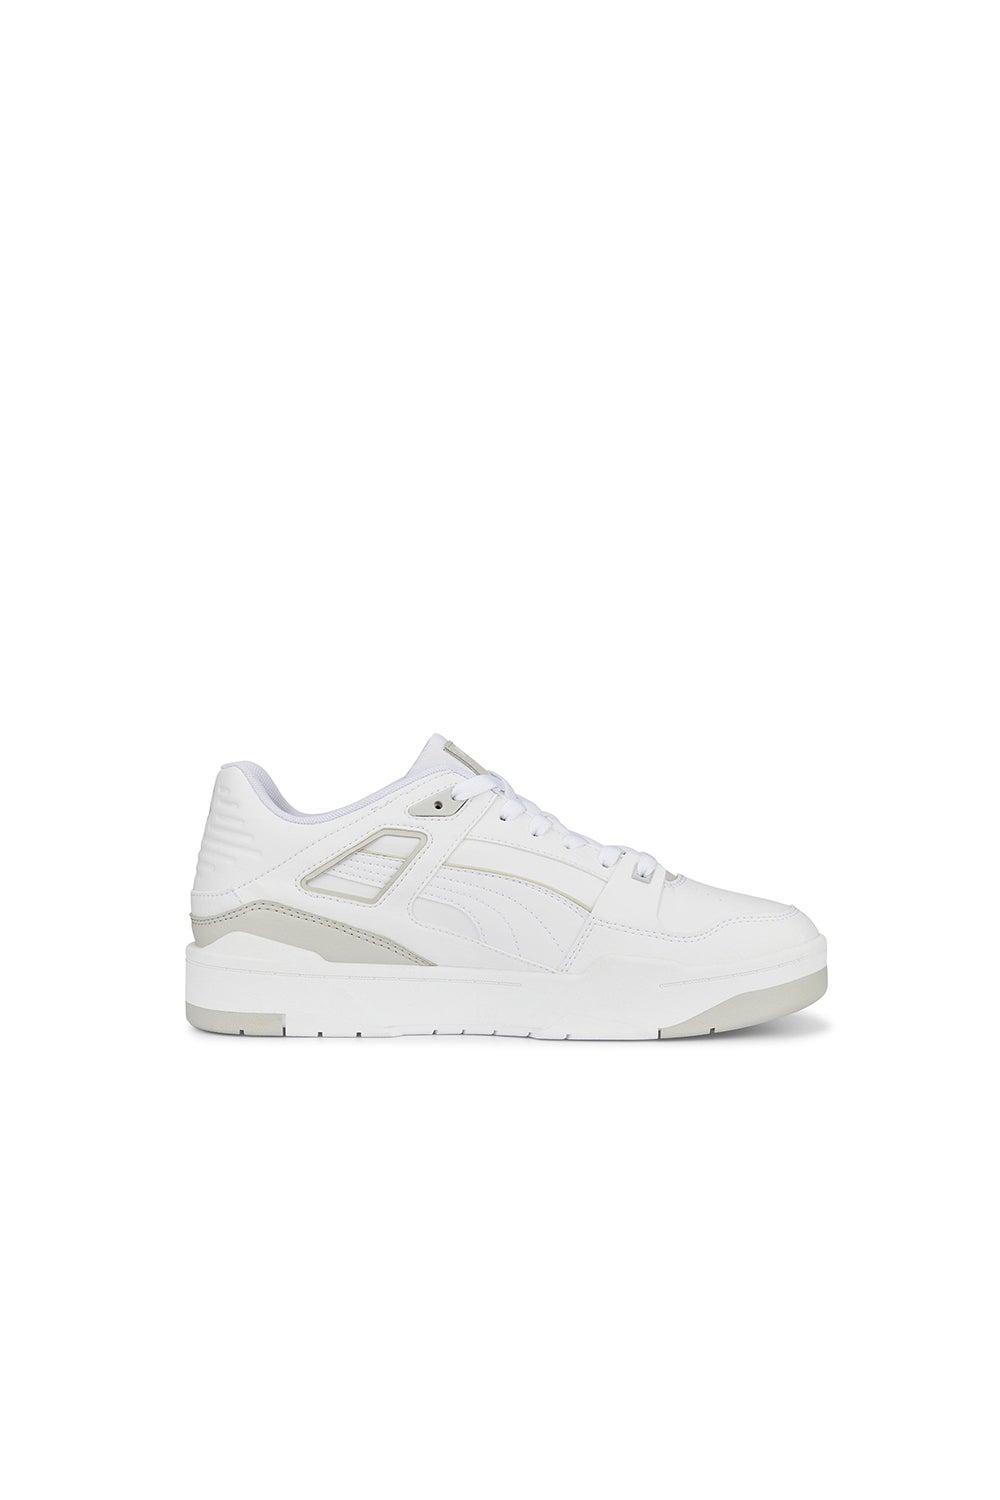 Puma Slipstream Re-Style Sneakers White/Gray Violet